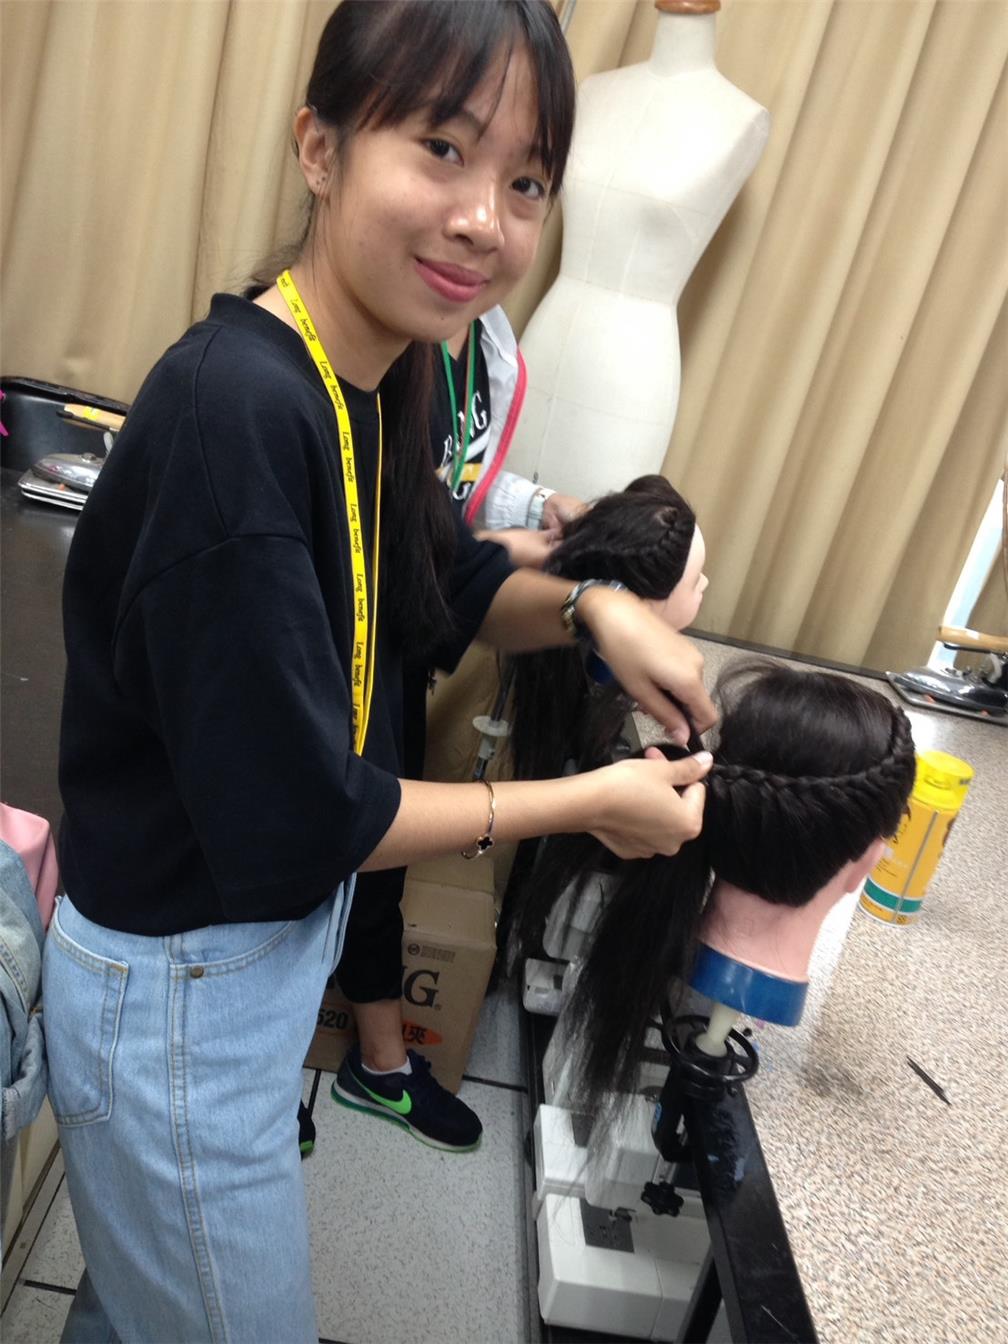 Experiencing a hairstyling course